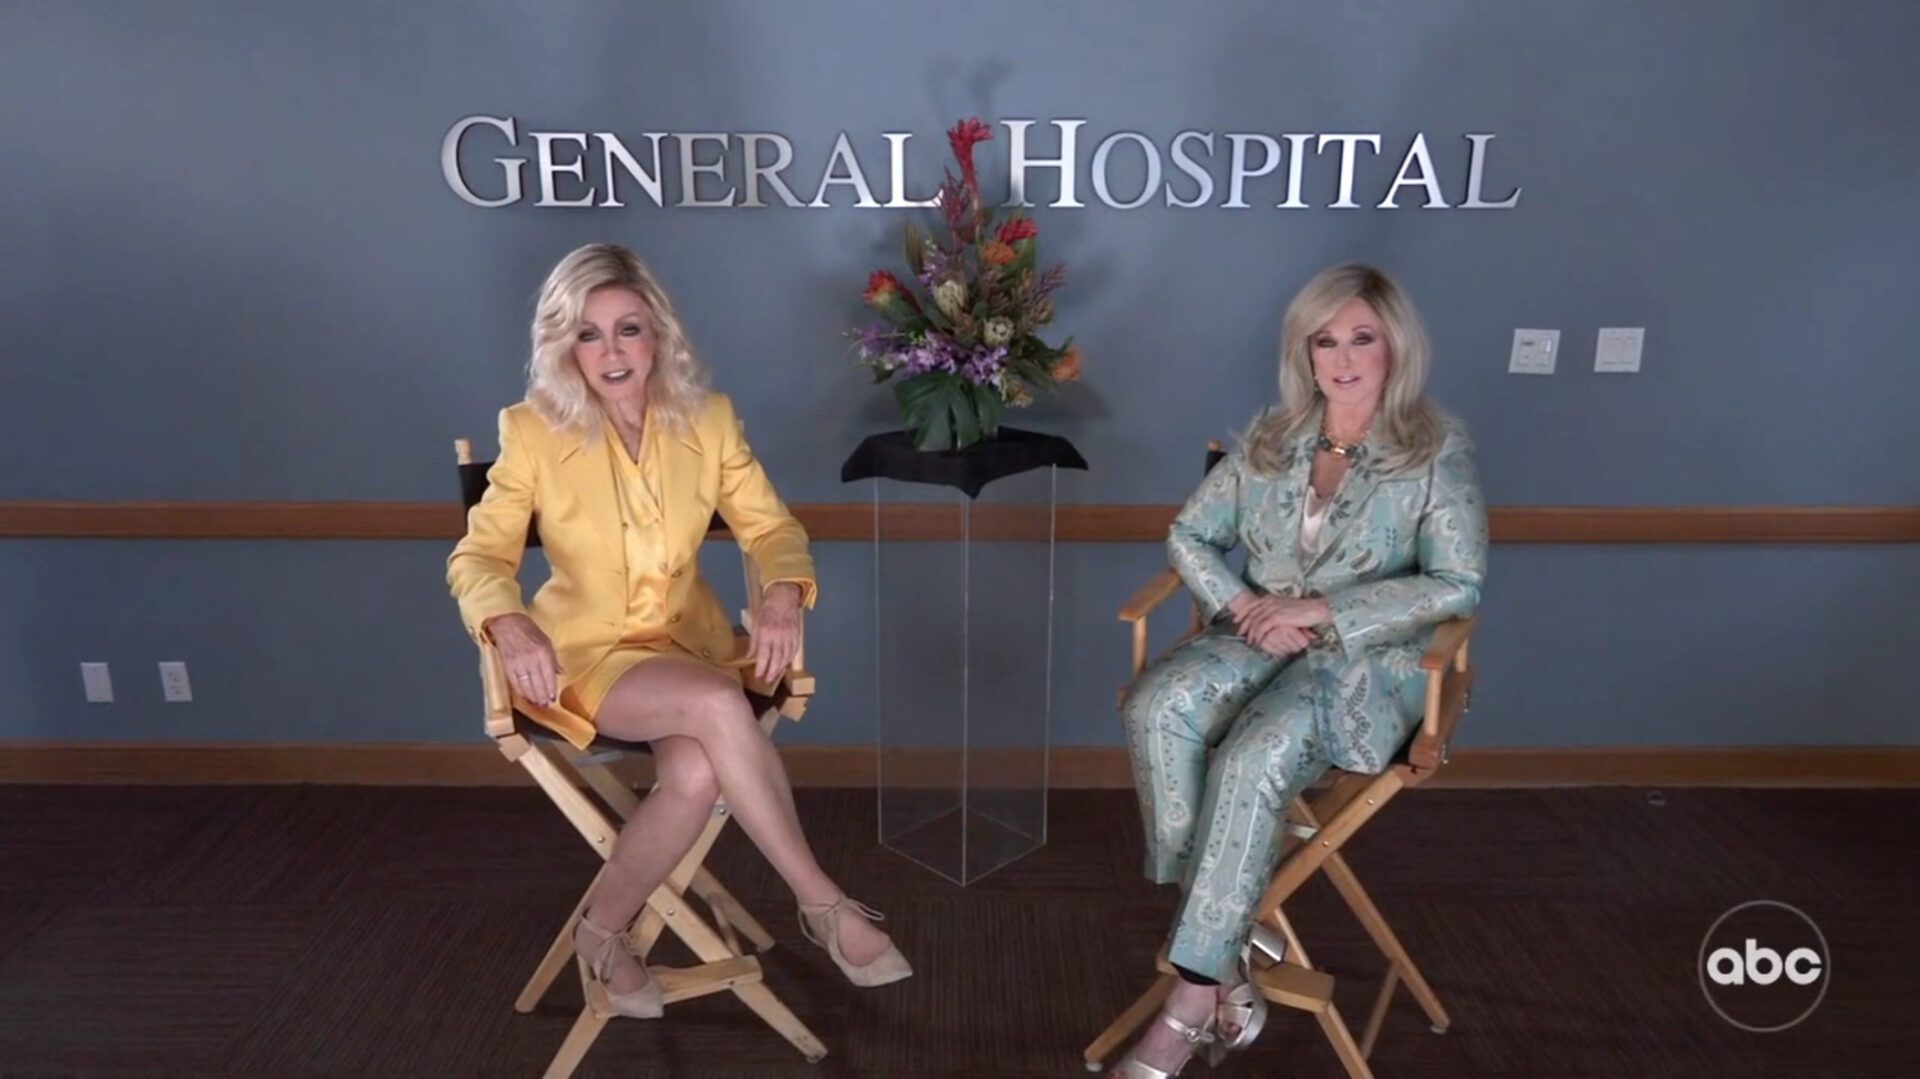 Donna Mills (Madeline Reeves) and Morgan Fairchild are hosting.